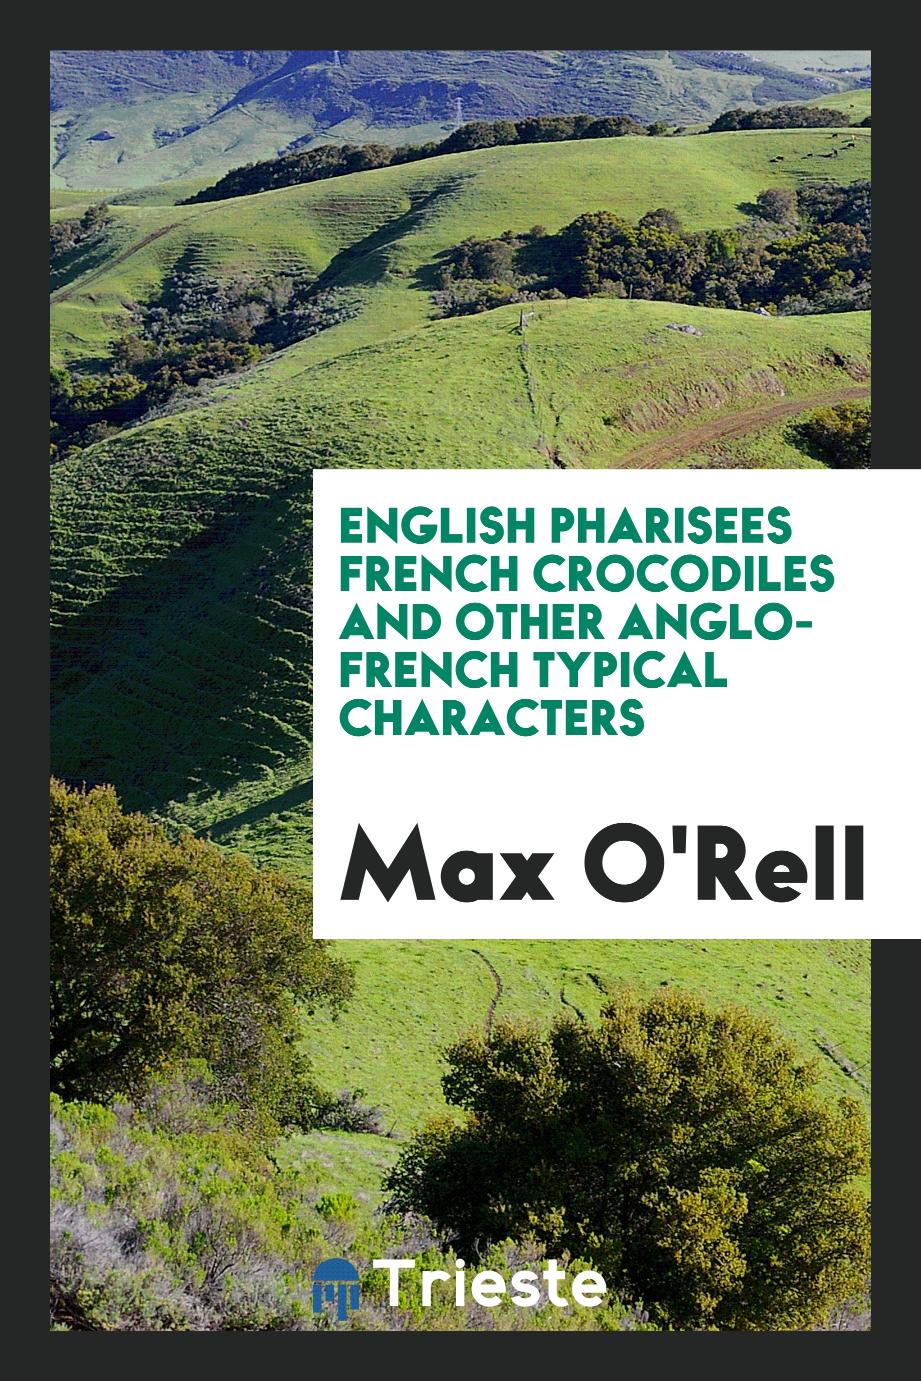 Max O'Rell - English Pharisees French Crocodiles and Other Anglo-French Typical Characters